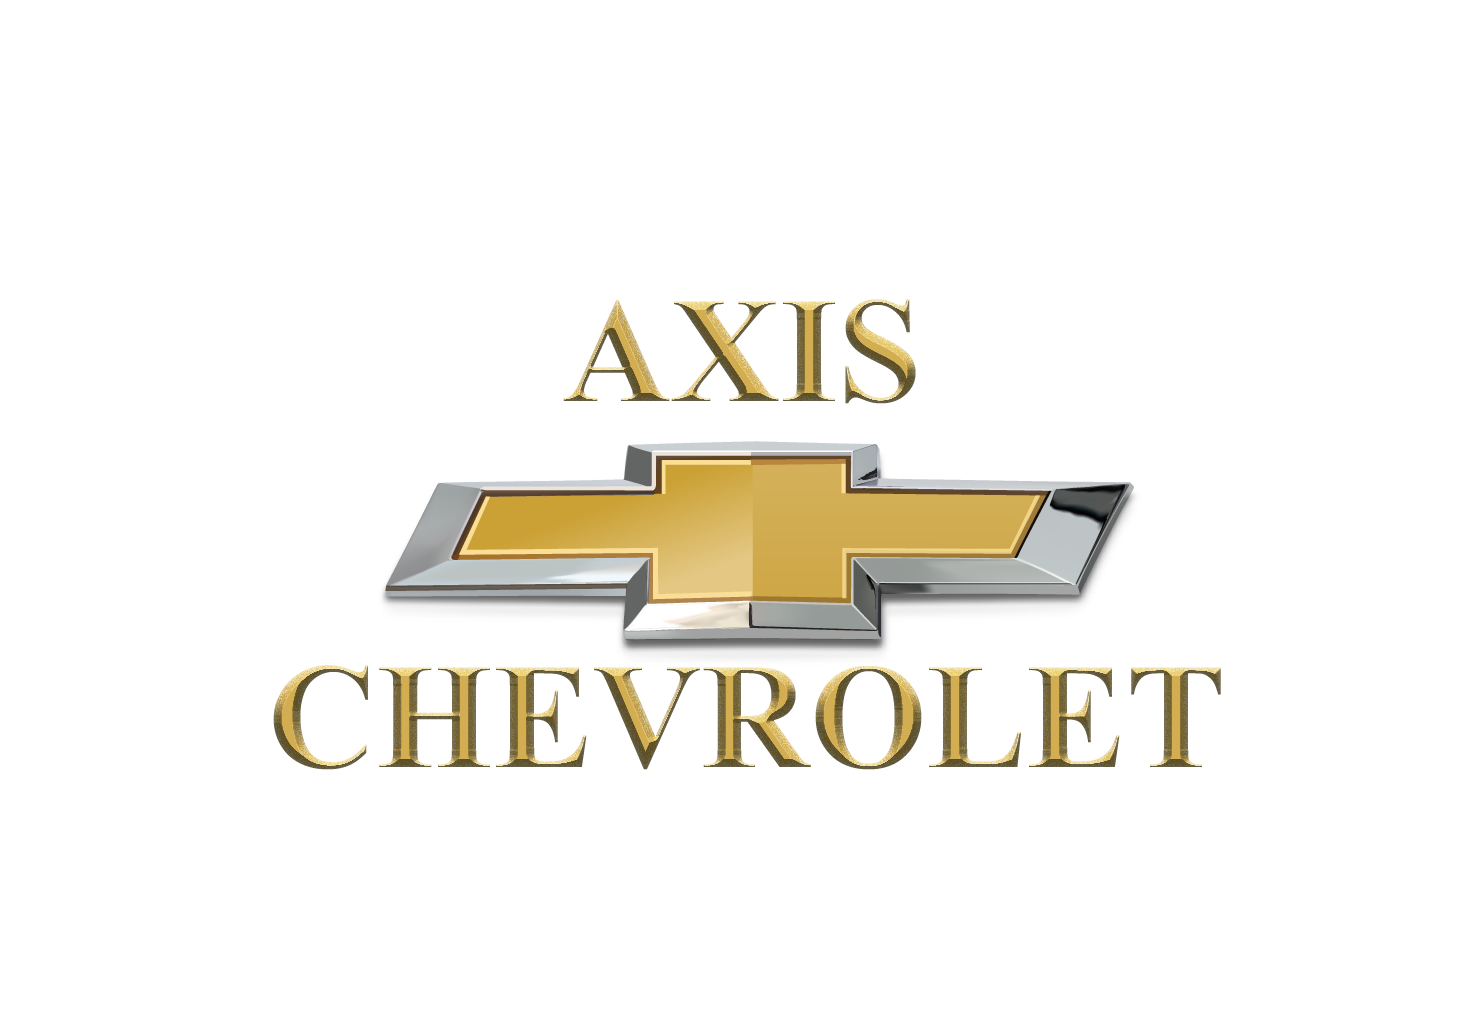 Axis Chevrolet of Jersey City in Jersey city, NJ | Kelley Blue Book